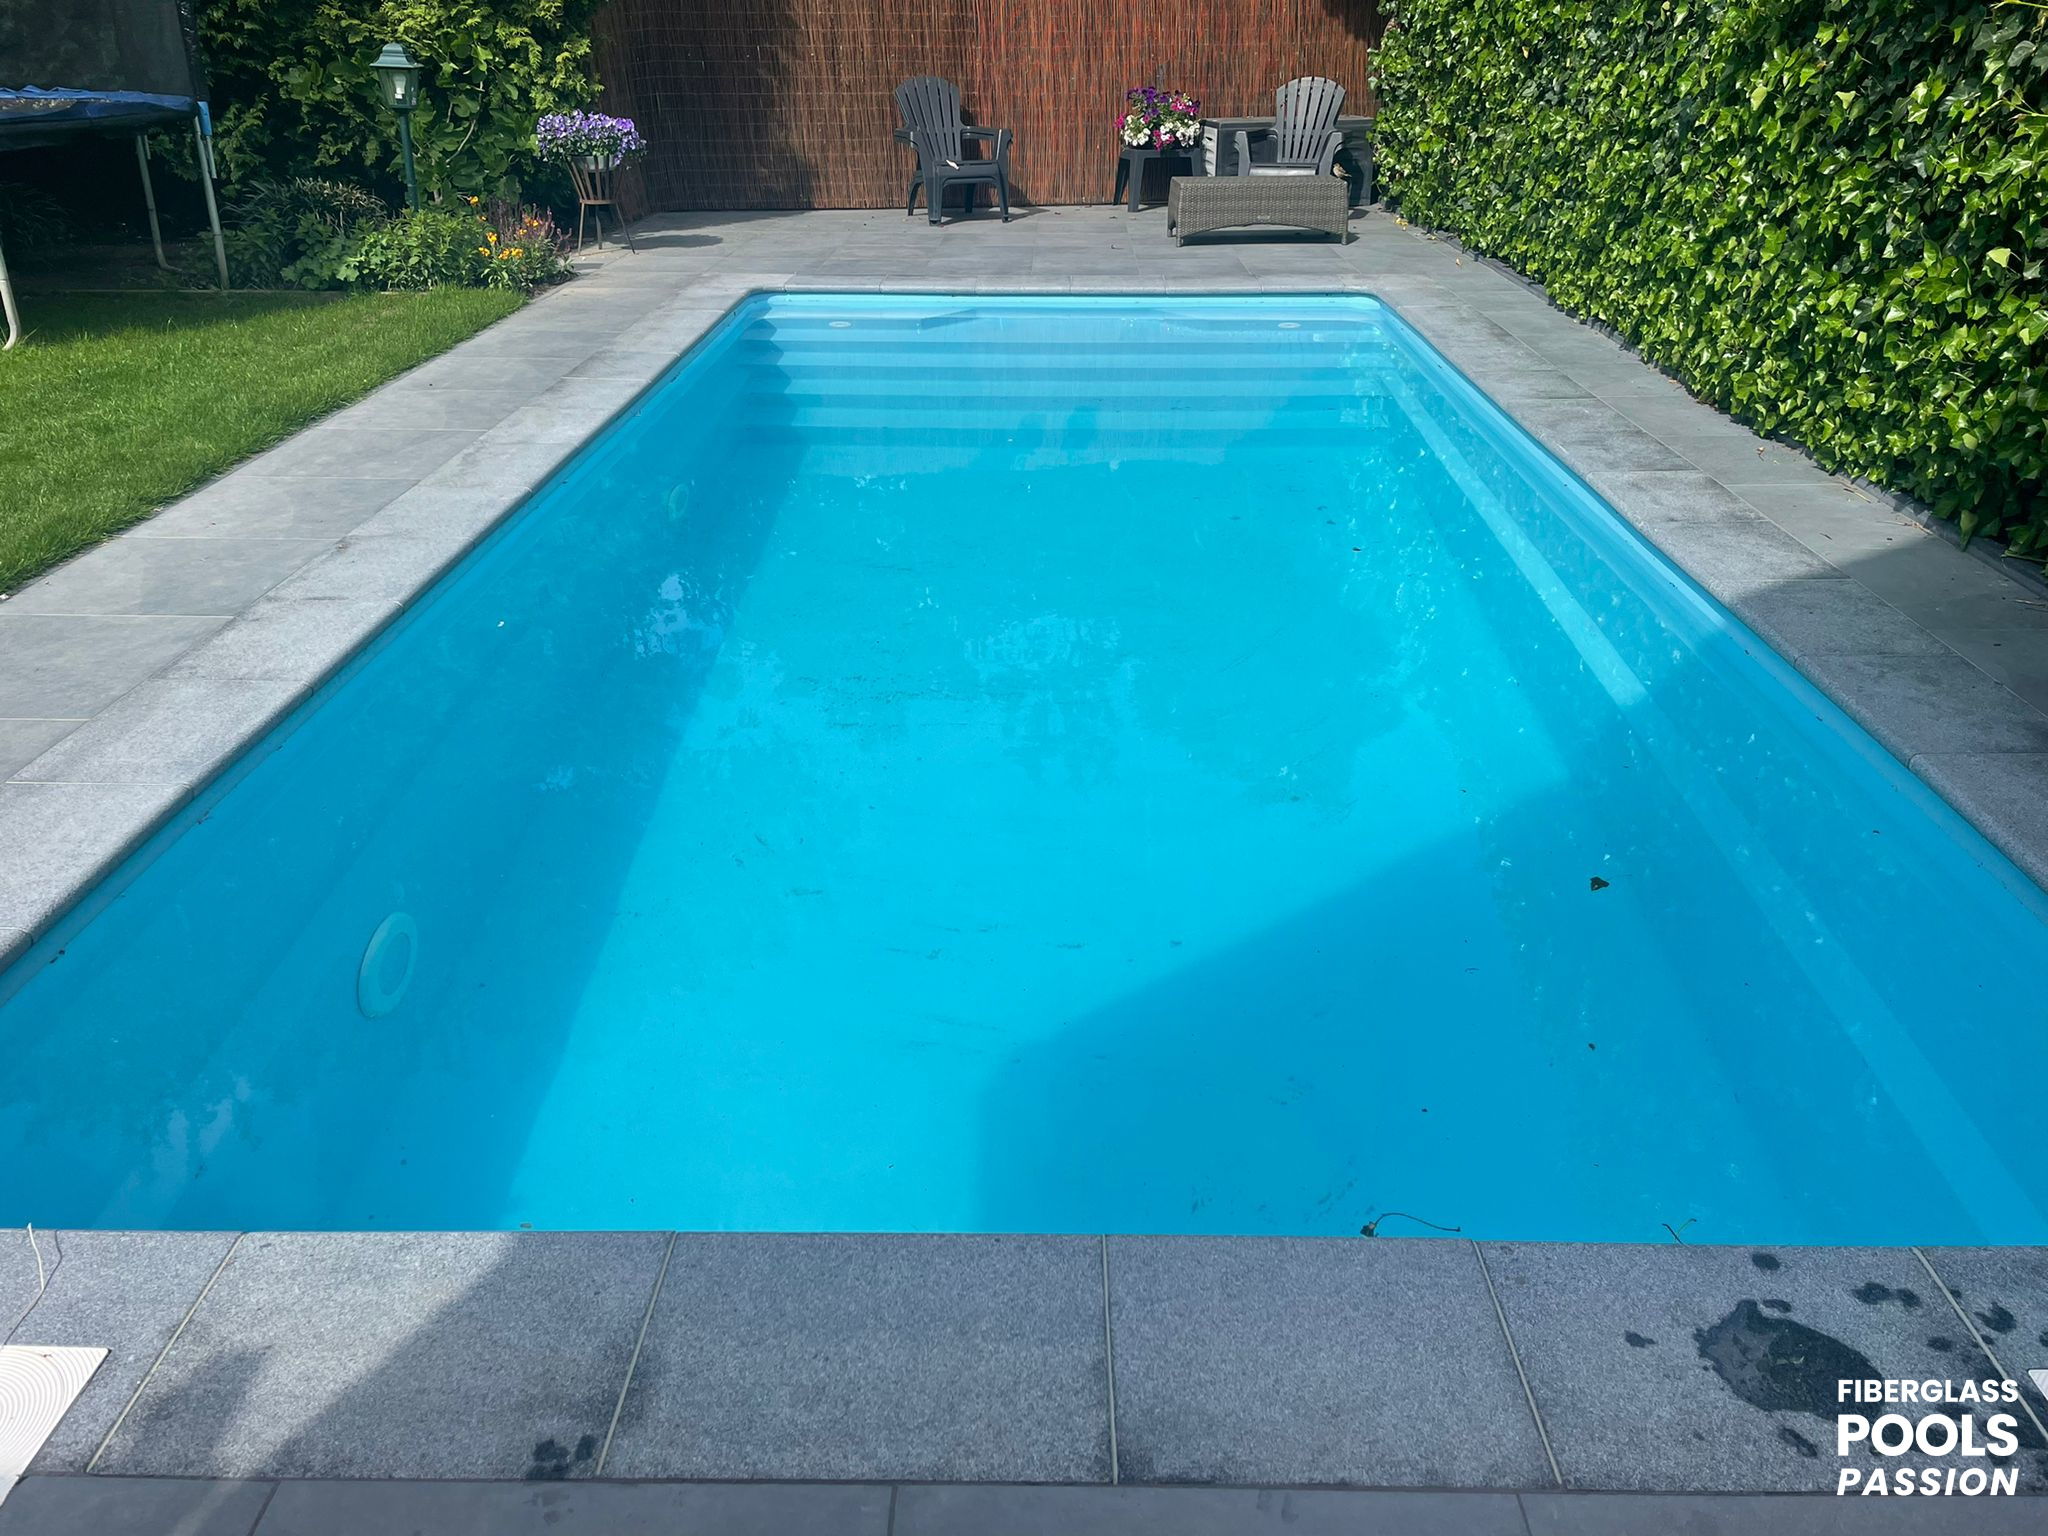 Fiberlass pool blue with perfect water and terrace